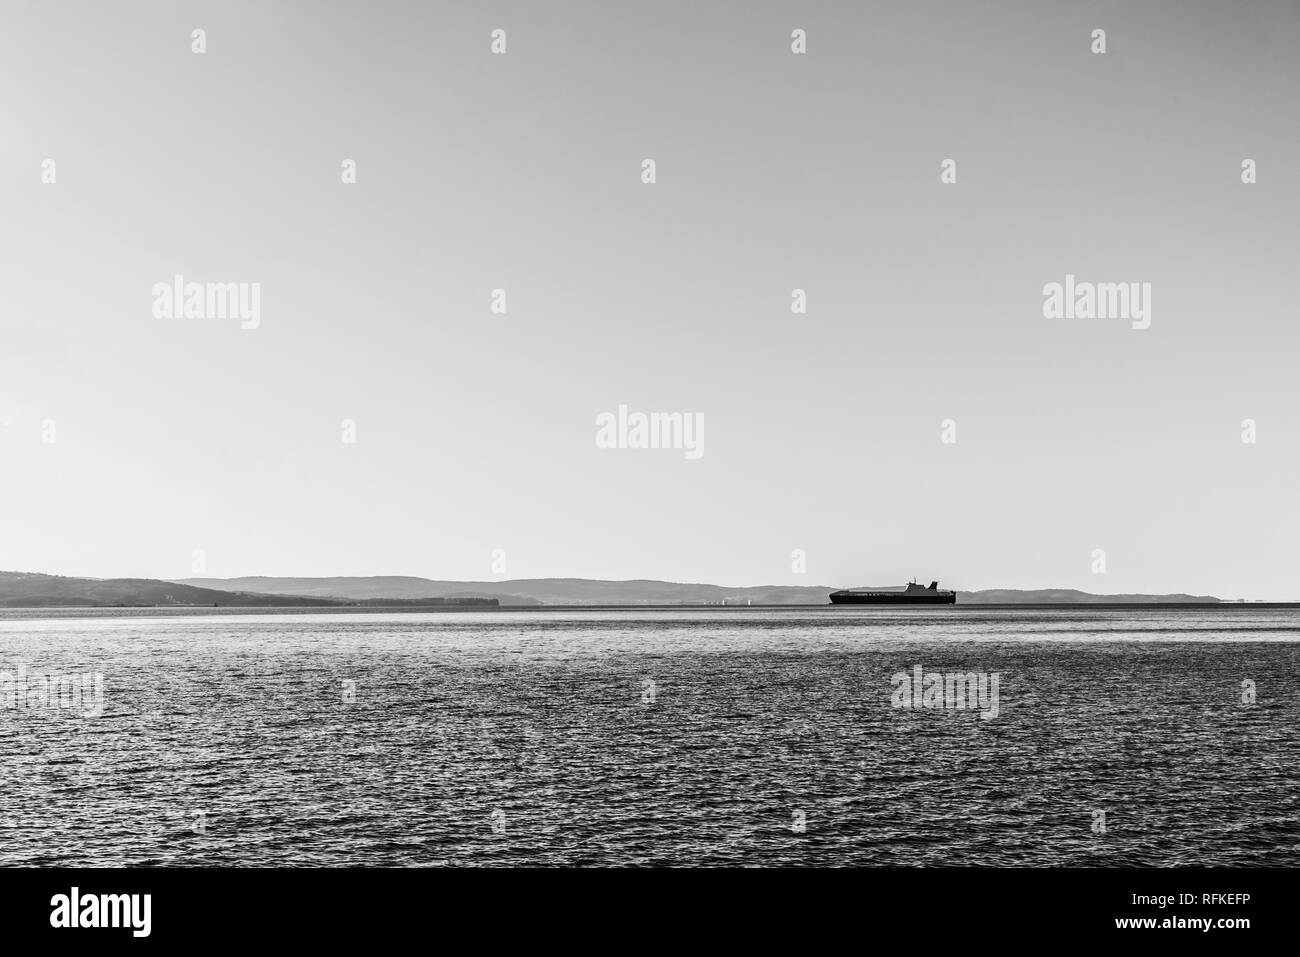 Ship is delivering cargo on a clear day. Stock Photo